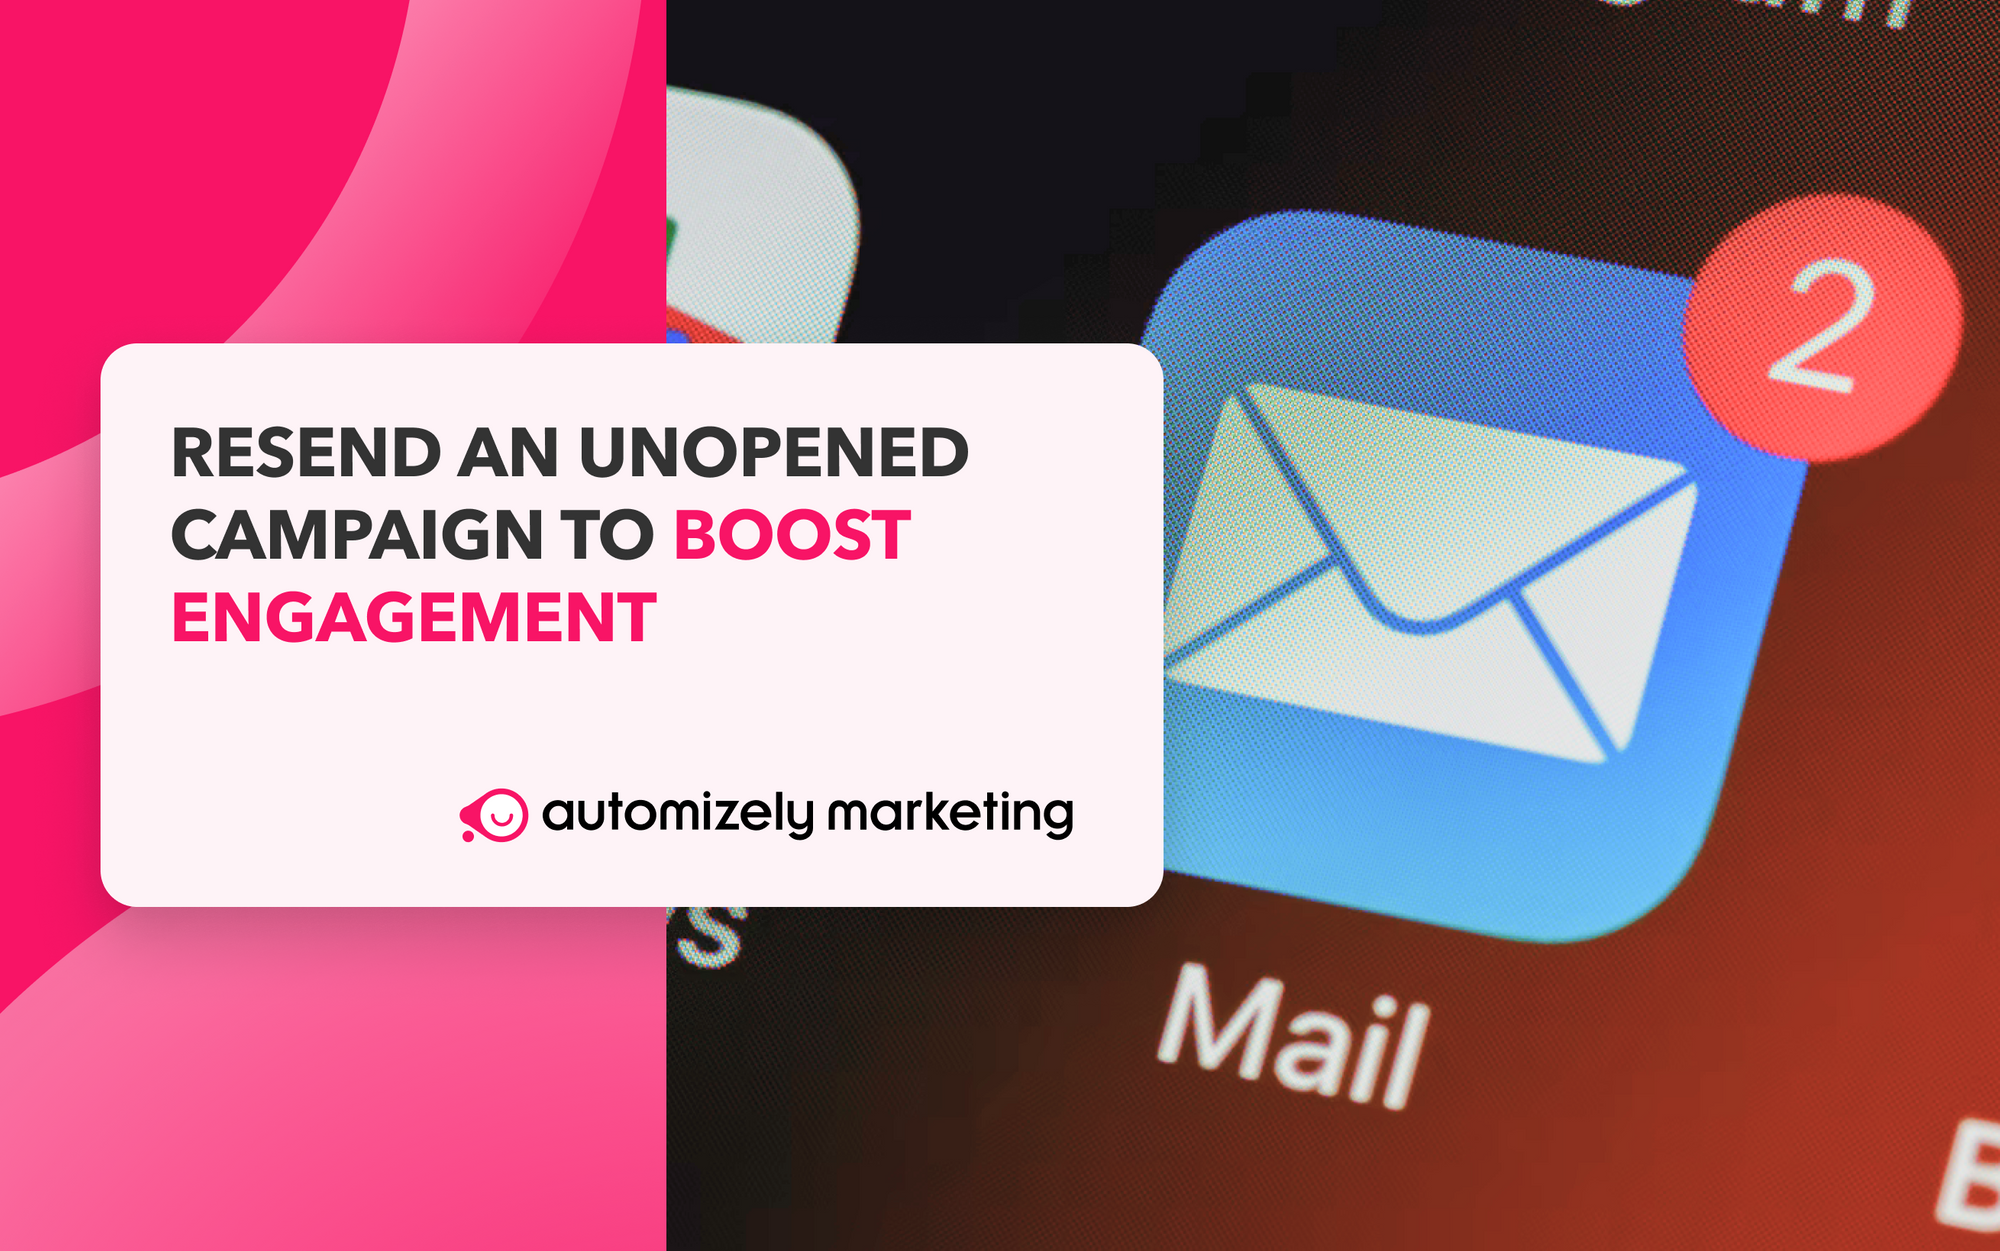 Increase user engagement by sending follow-up emails to non-openers